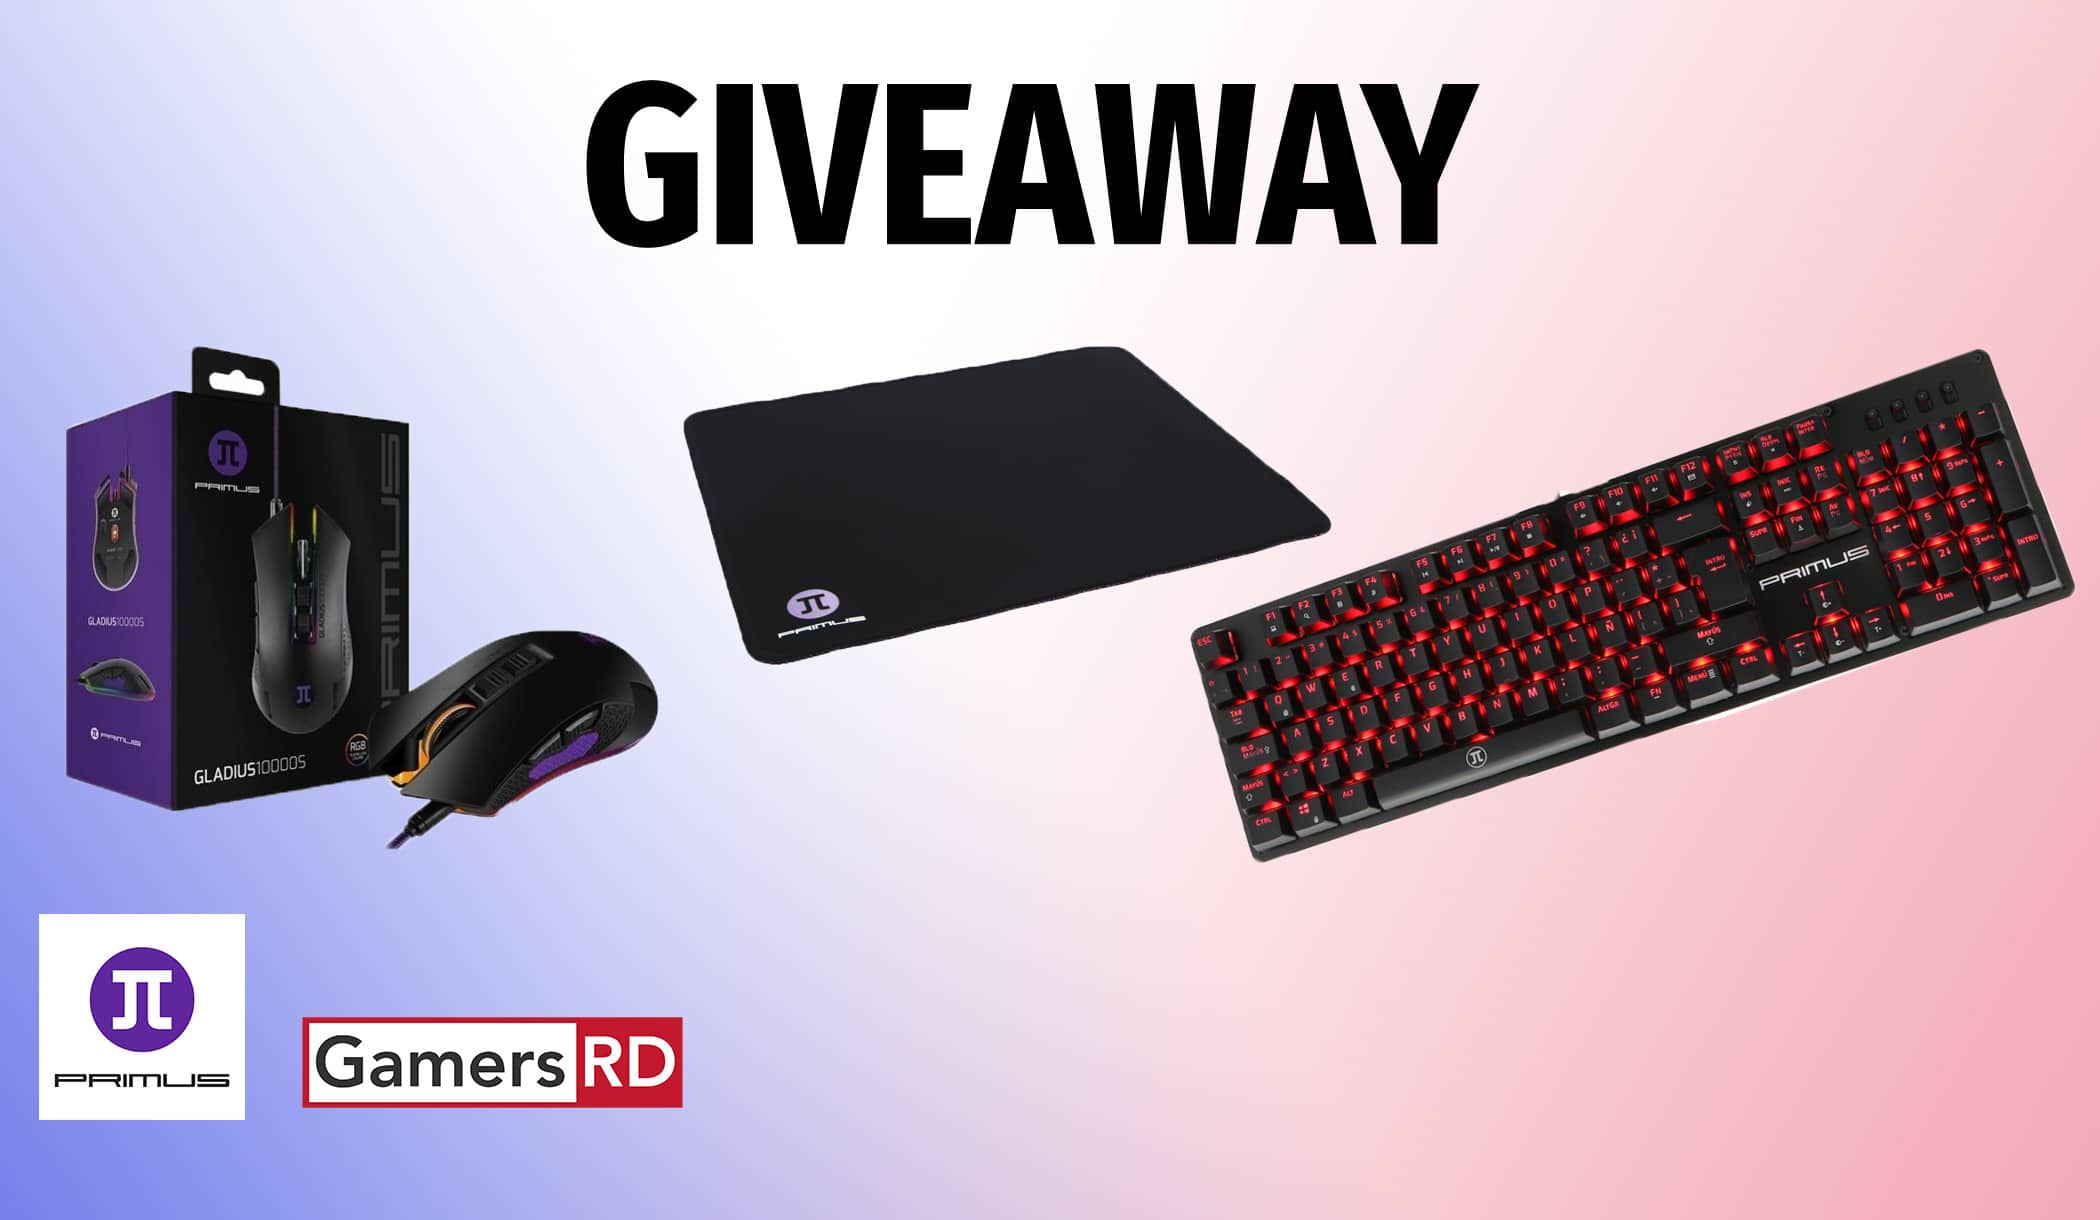 GamersRD, Primus Gaming, Teclado, Mouse, Mouse Pad, Sorteo, GamersRD